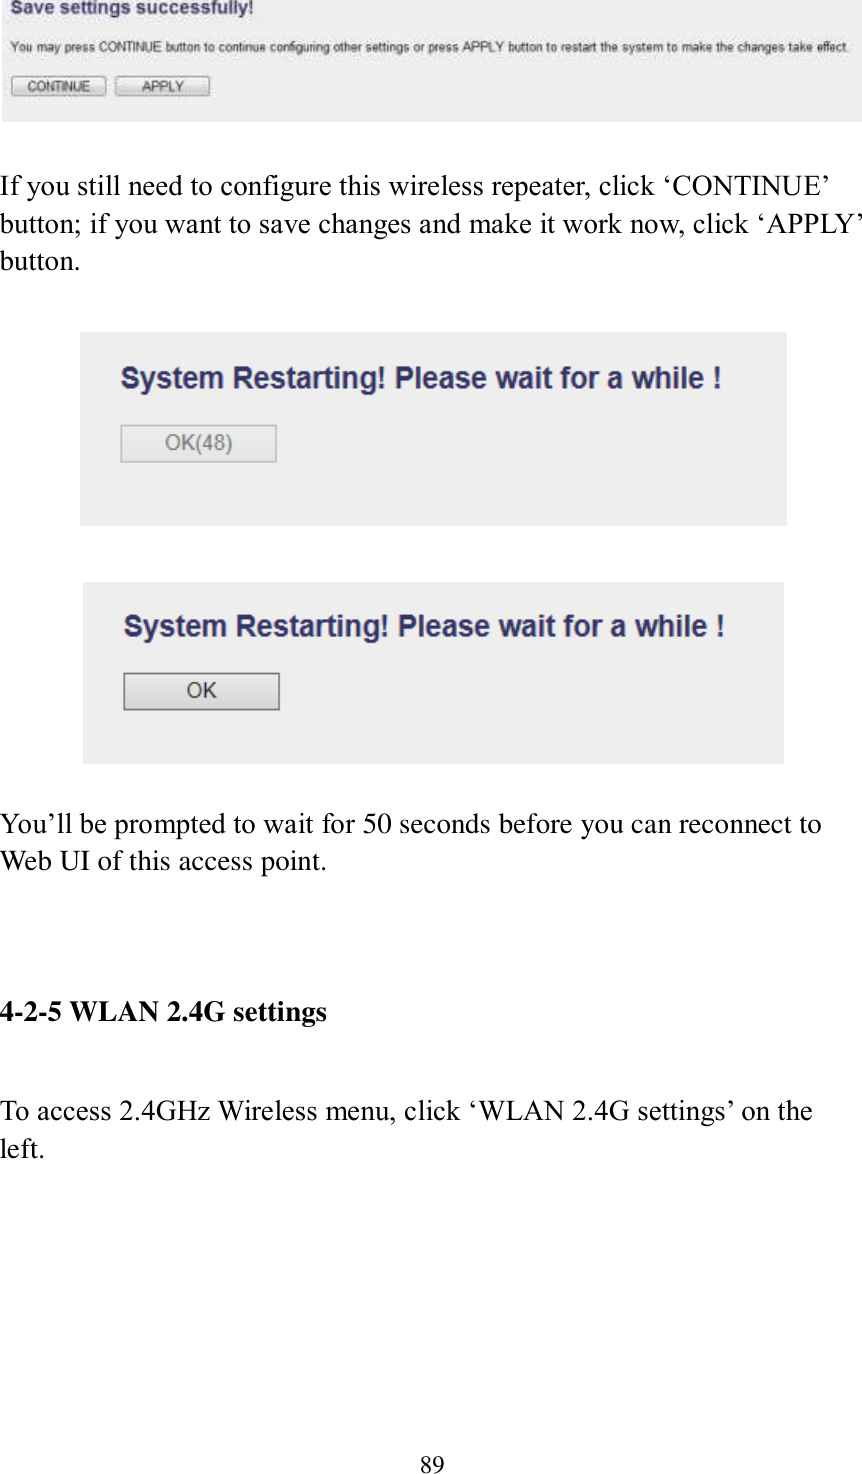 89  If you still need to configure this wireless repeater, click ‘CONTINUE’ button; if you want to save changes and make it work now, click ‘APPLY’ button.        You’ll be prompted to wait for 50 seconds before you can reconnect to Web UI of this access point.    4-2-5 WLAN 2.4G settings  To access 2.4GHz Wireless menu, click ‘WLAN 2.4G settings’ on the left.  